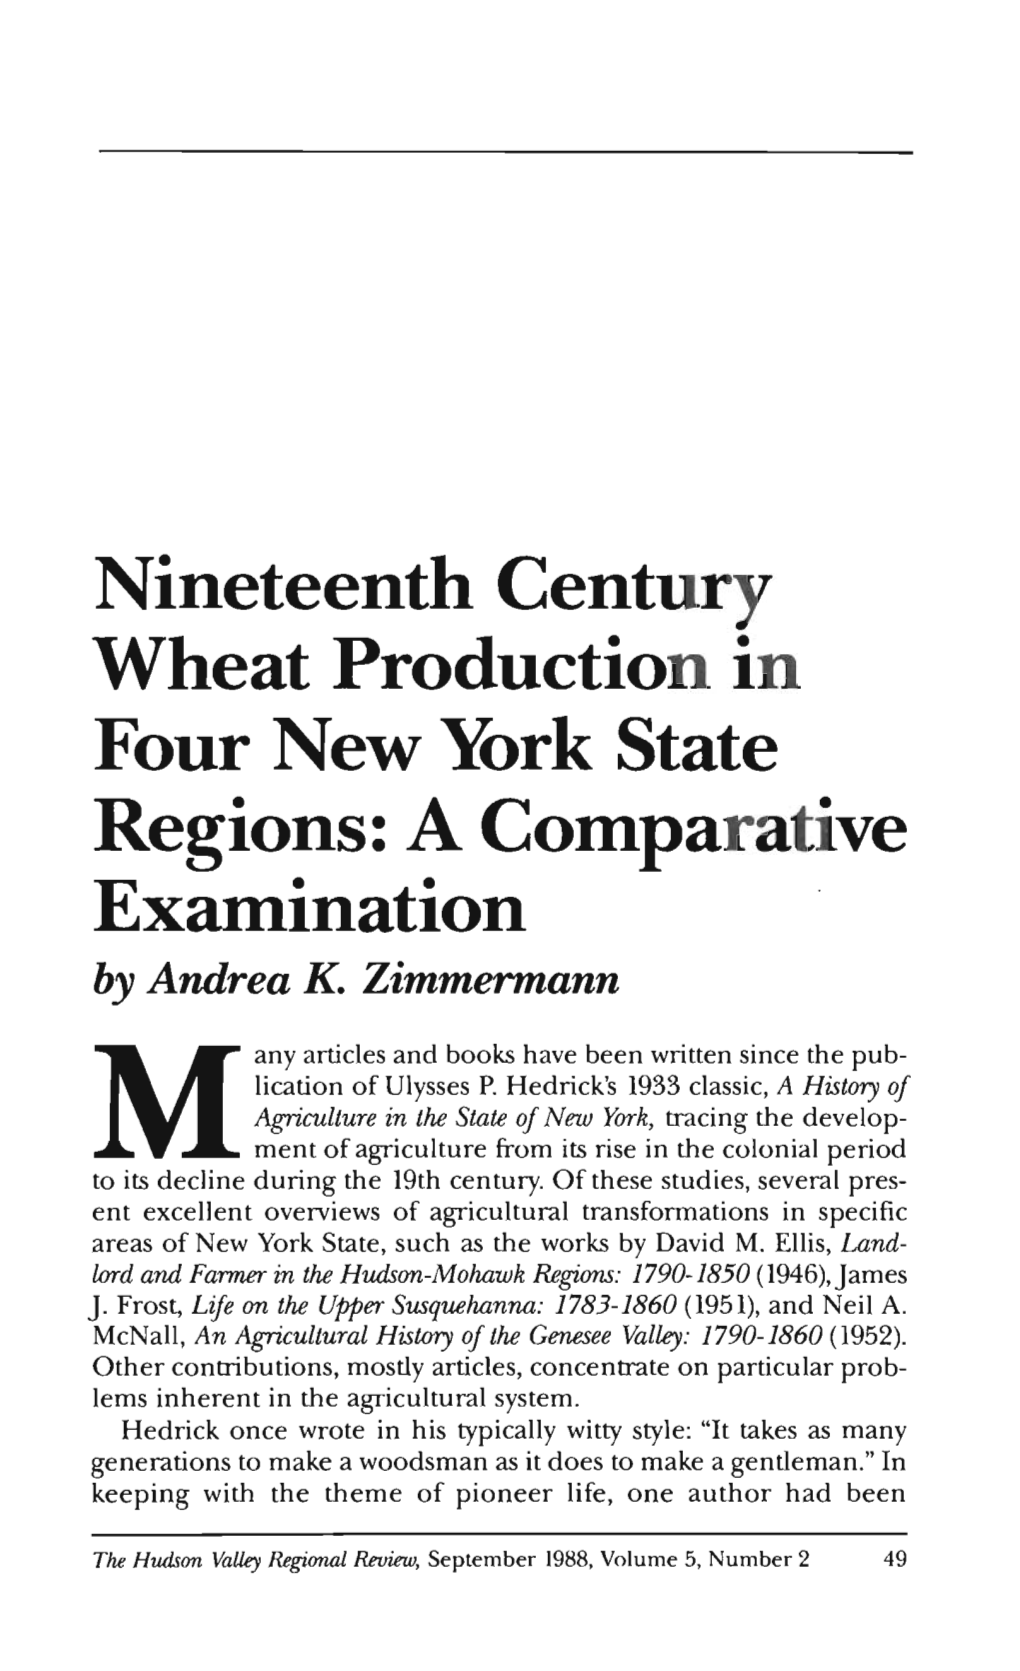 Nineteenth Century Wheat Production in Four New York State Regions: a Codlparative Exaiilination by Andrea K